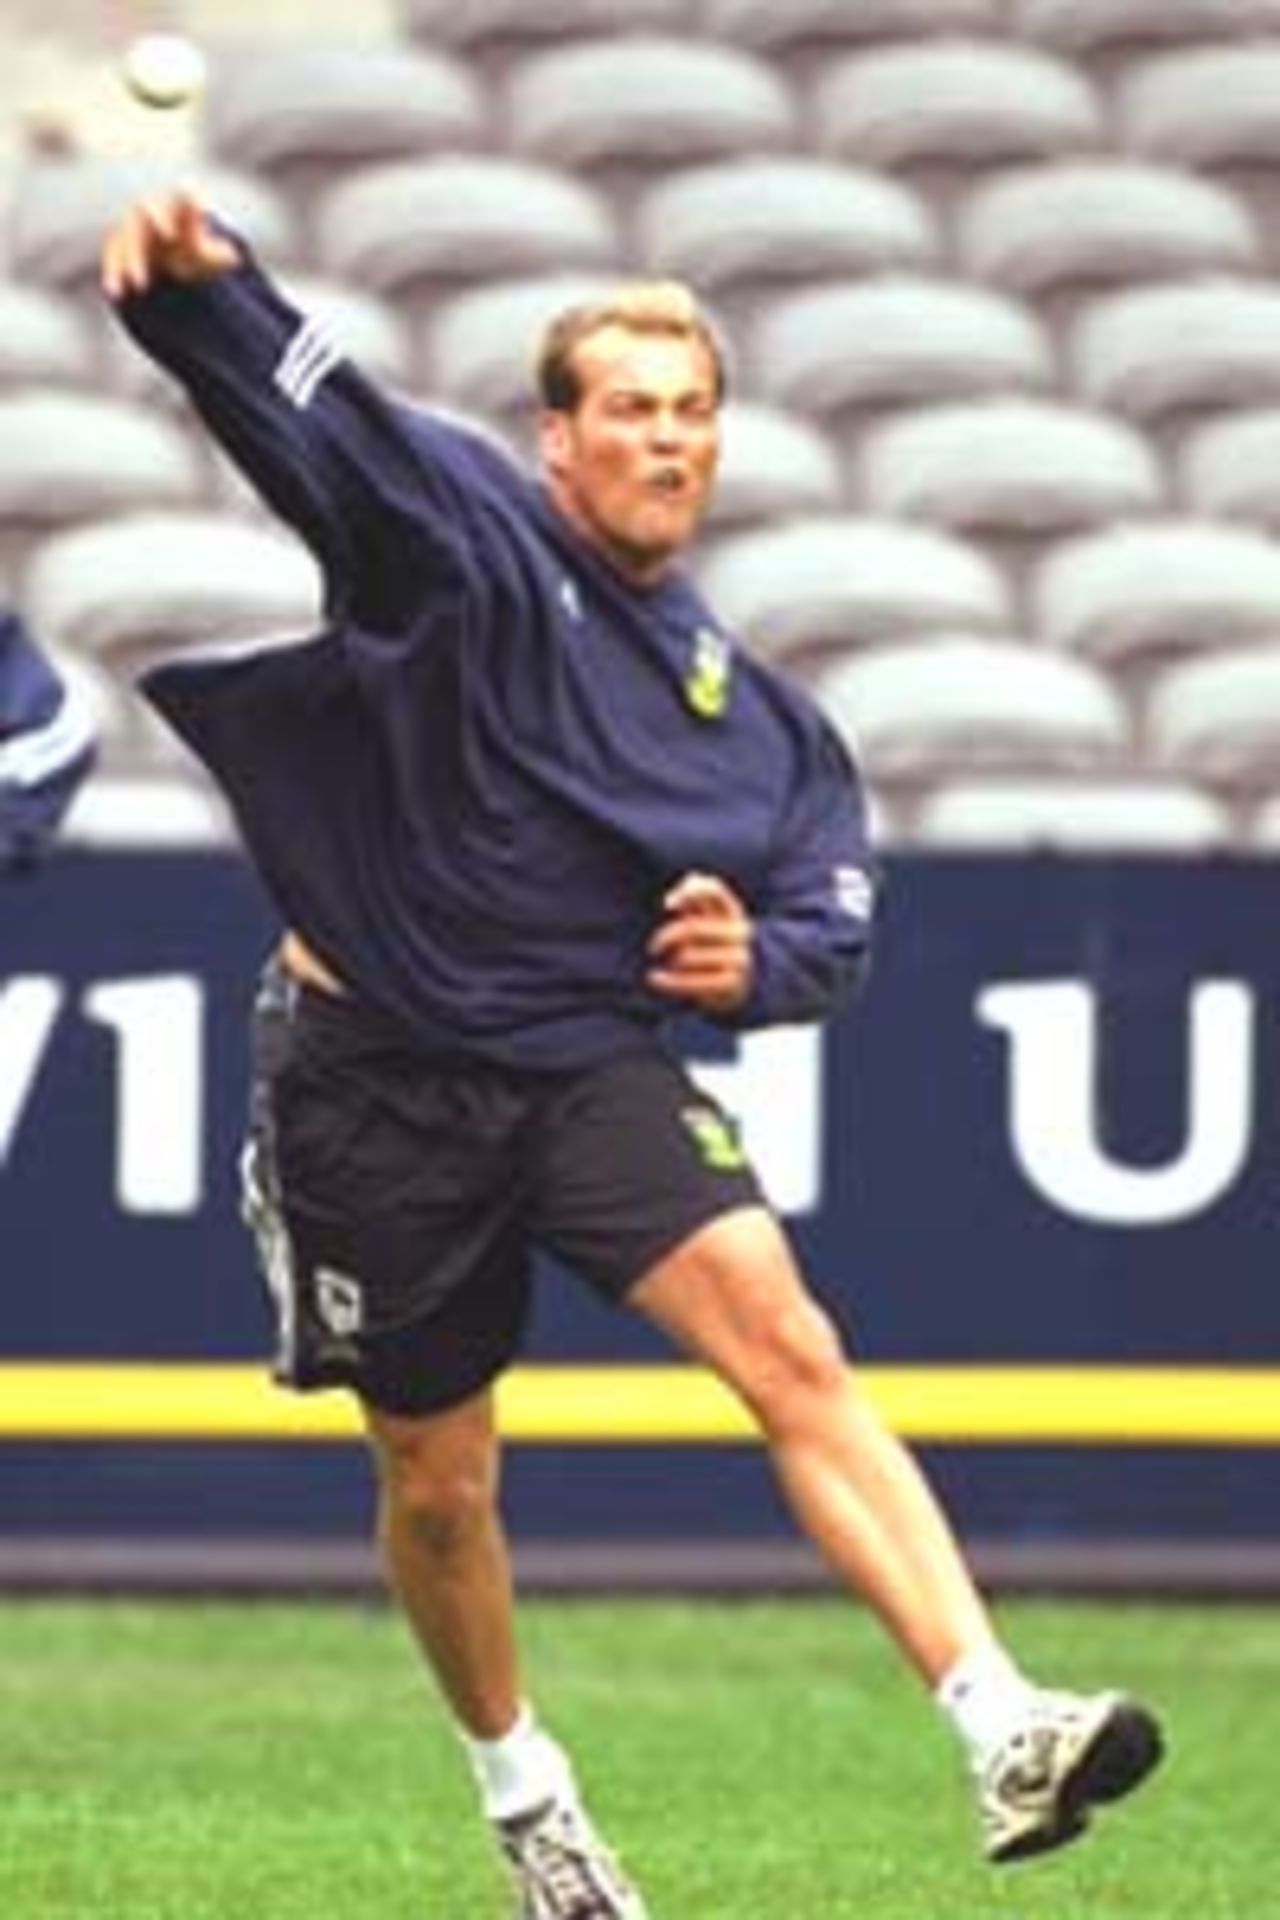 14 Aug 2000: Jacques Kallis of the South African Cricket Team trains on Colonial Stadium, venue for the Super Challenge 2000 one day cricket series beginning Wednesday in Melbourne, Australia.